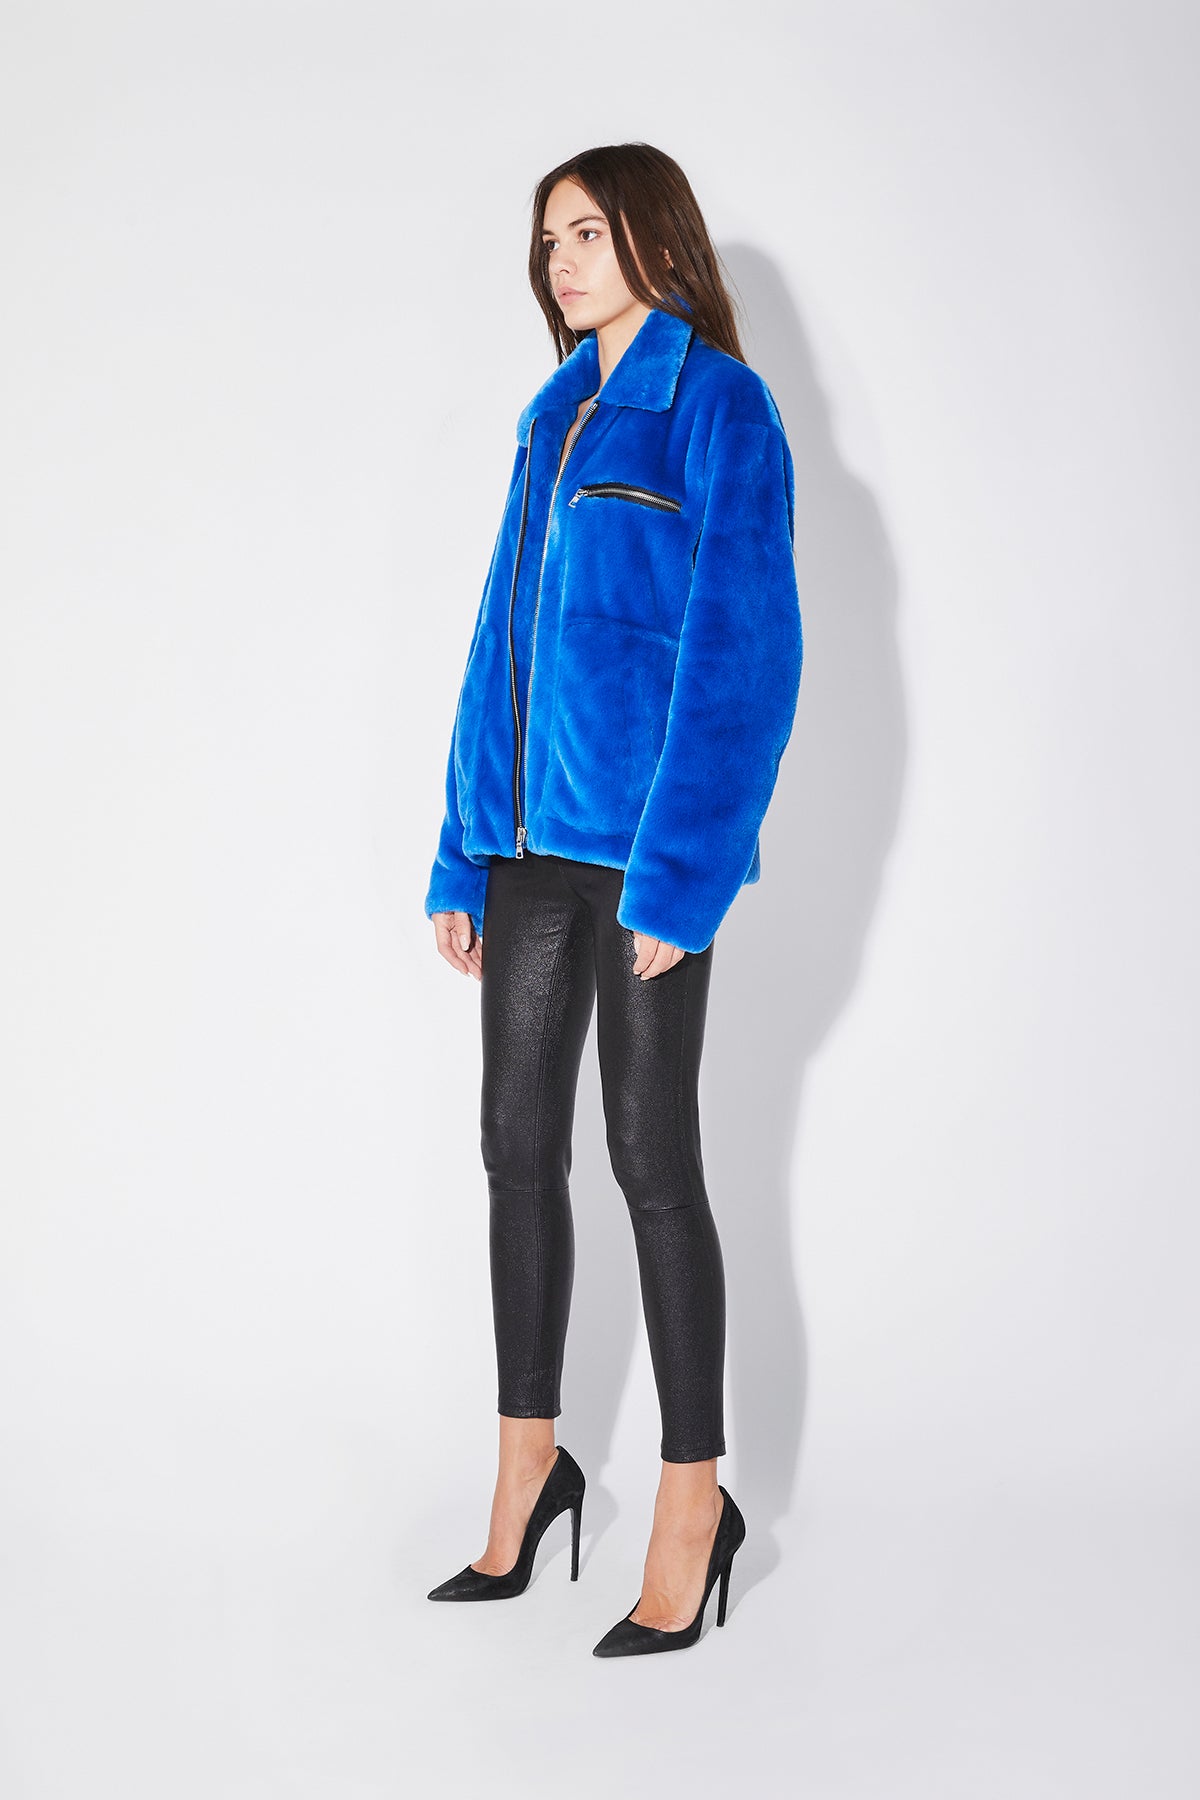 REESE JACKET | MAGNETIC BLUE